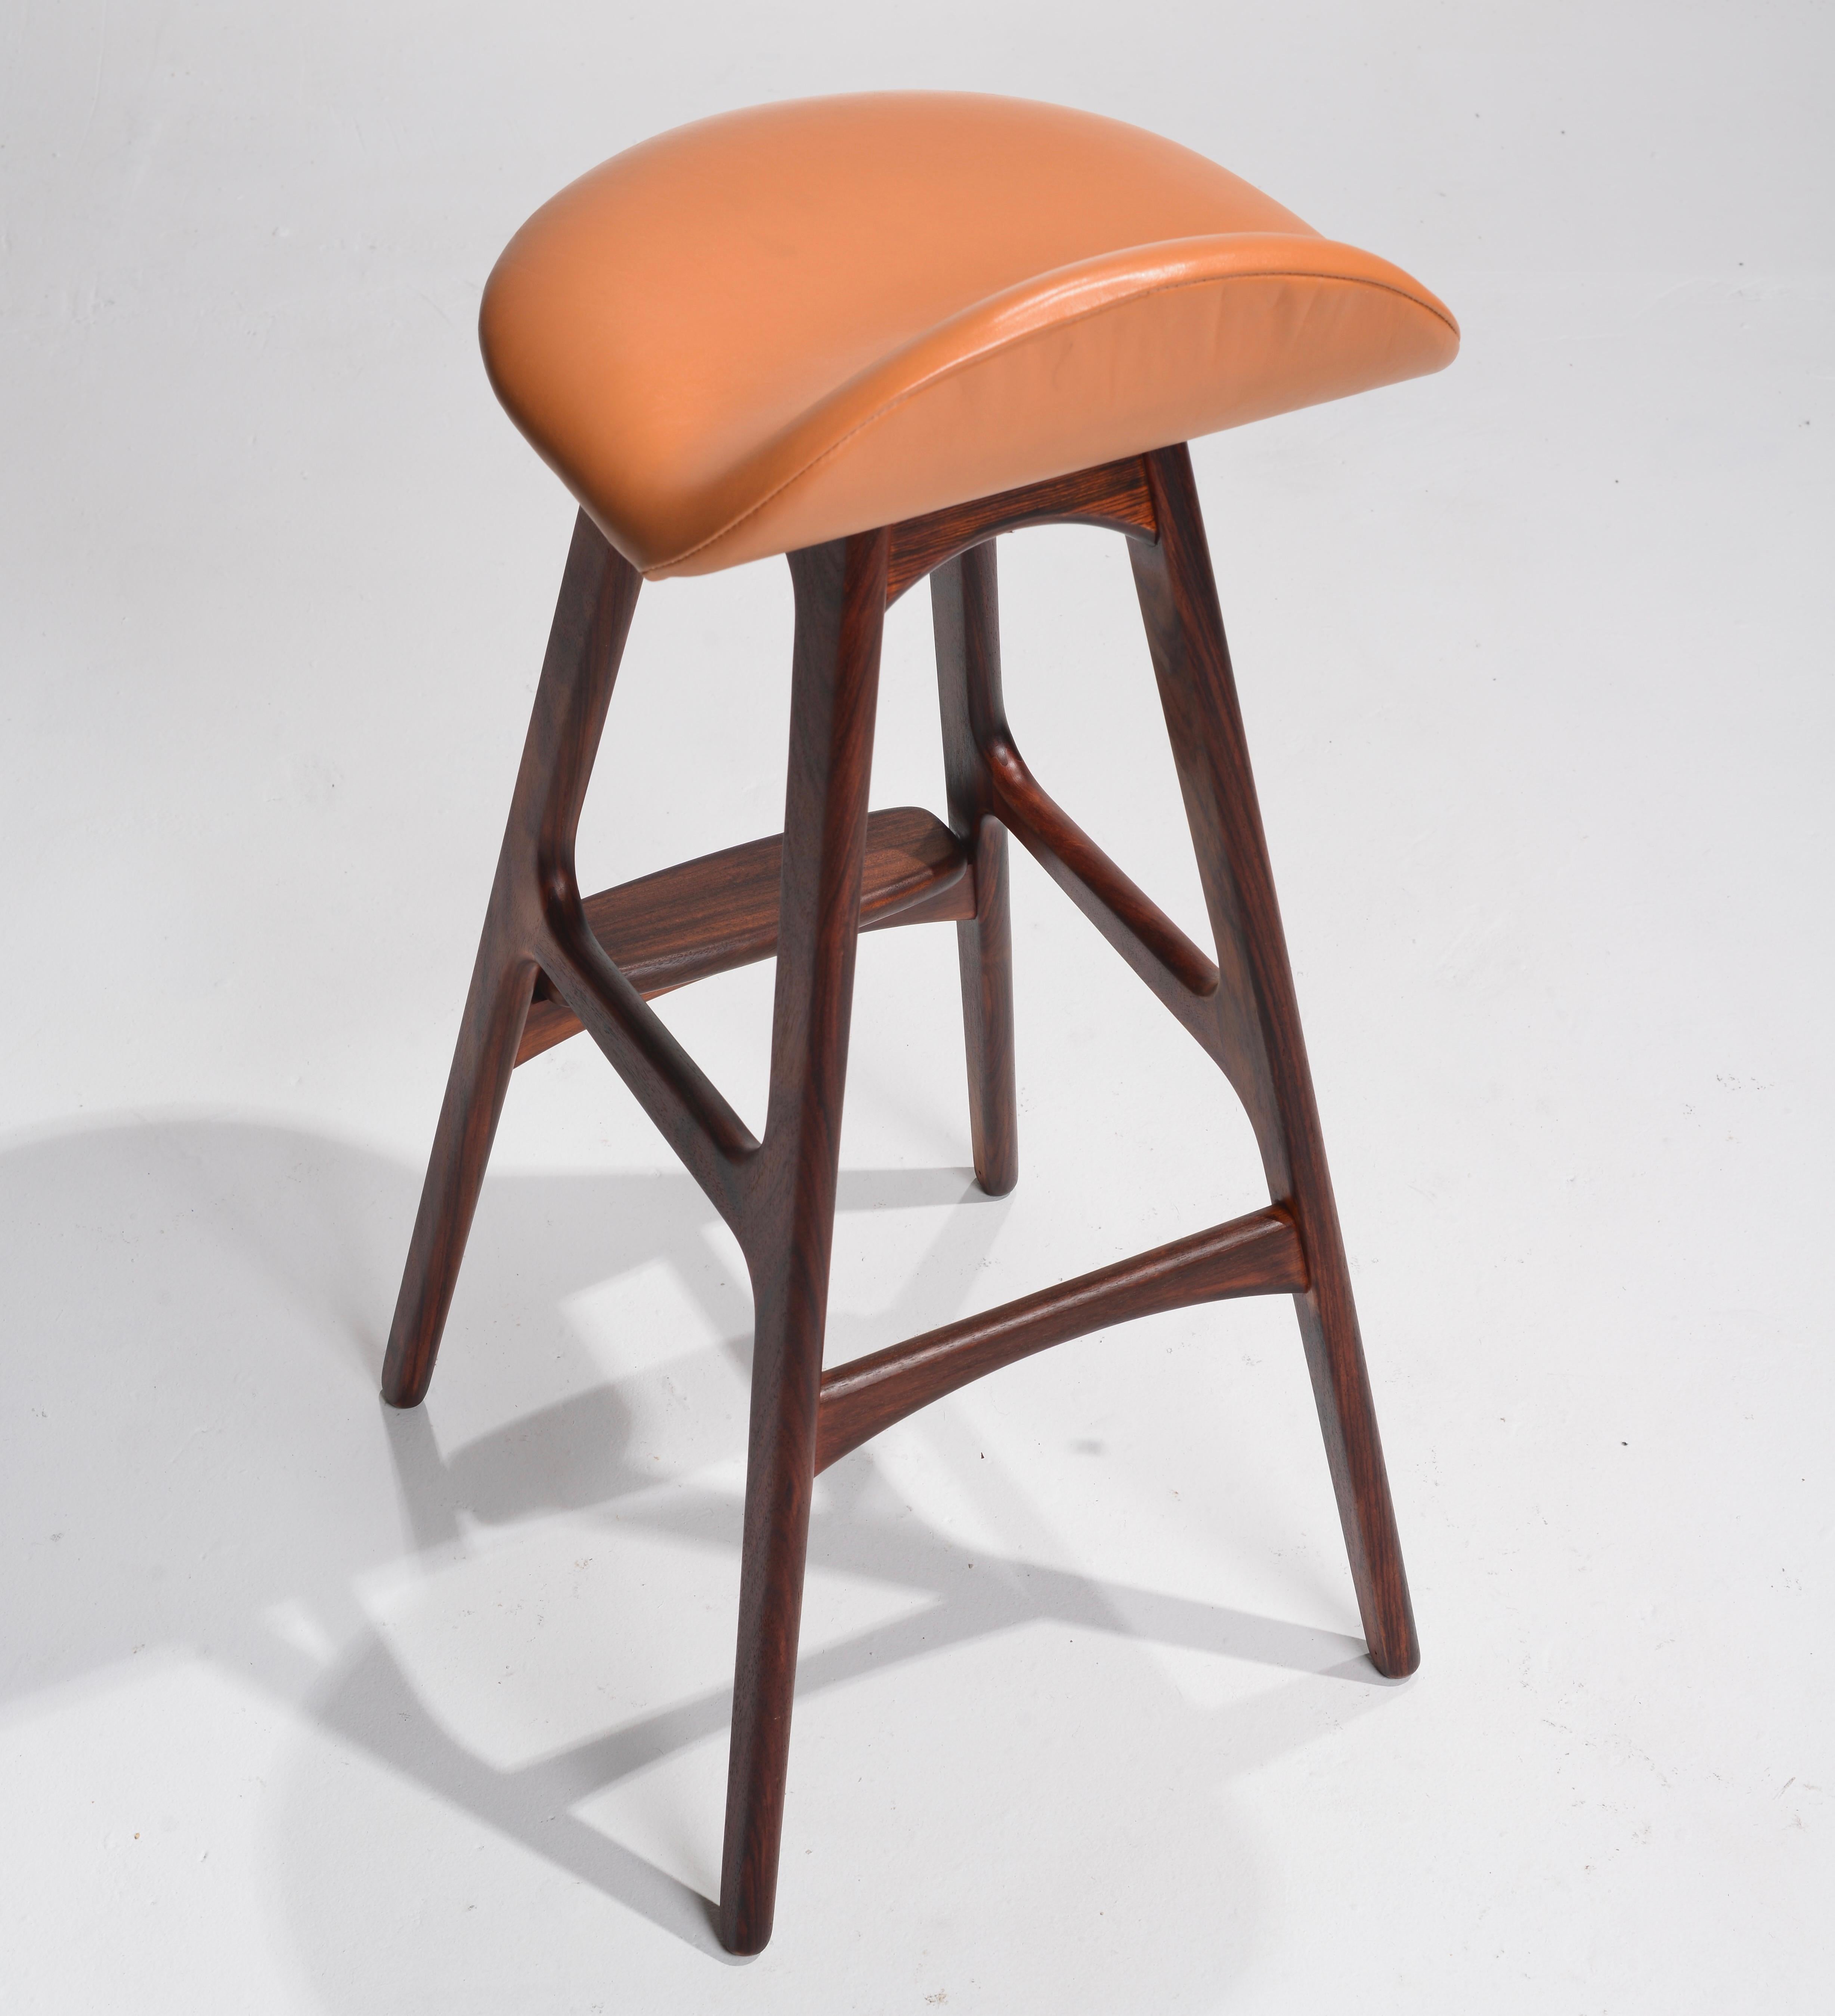 Erik Buch Rosewood Bar Stools by Oddense Maskinsnedkeri In Excellent Condition For Sale In Los Angeles, CA